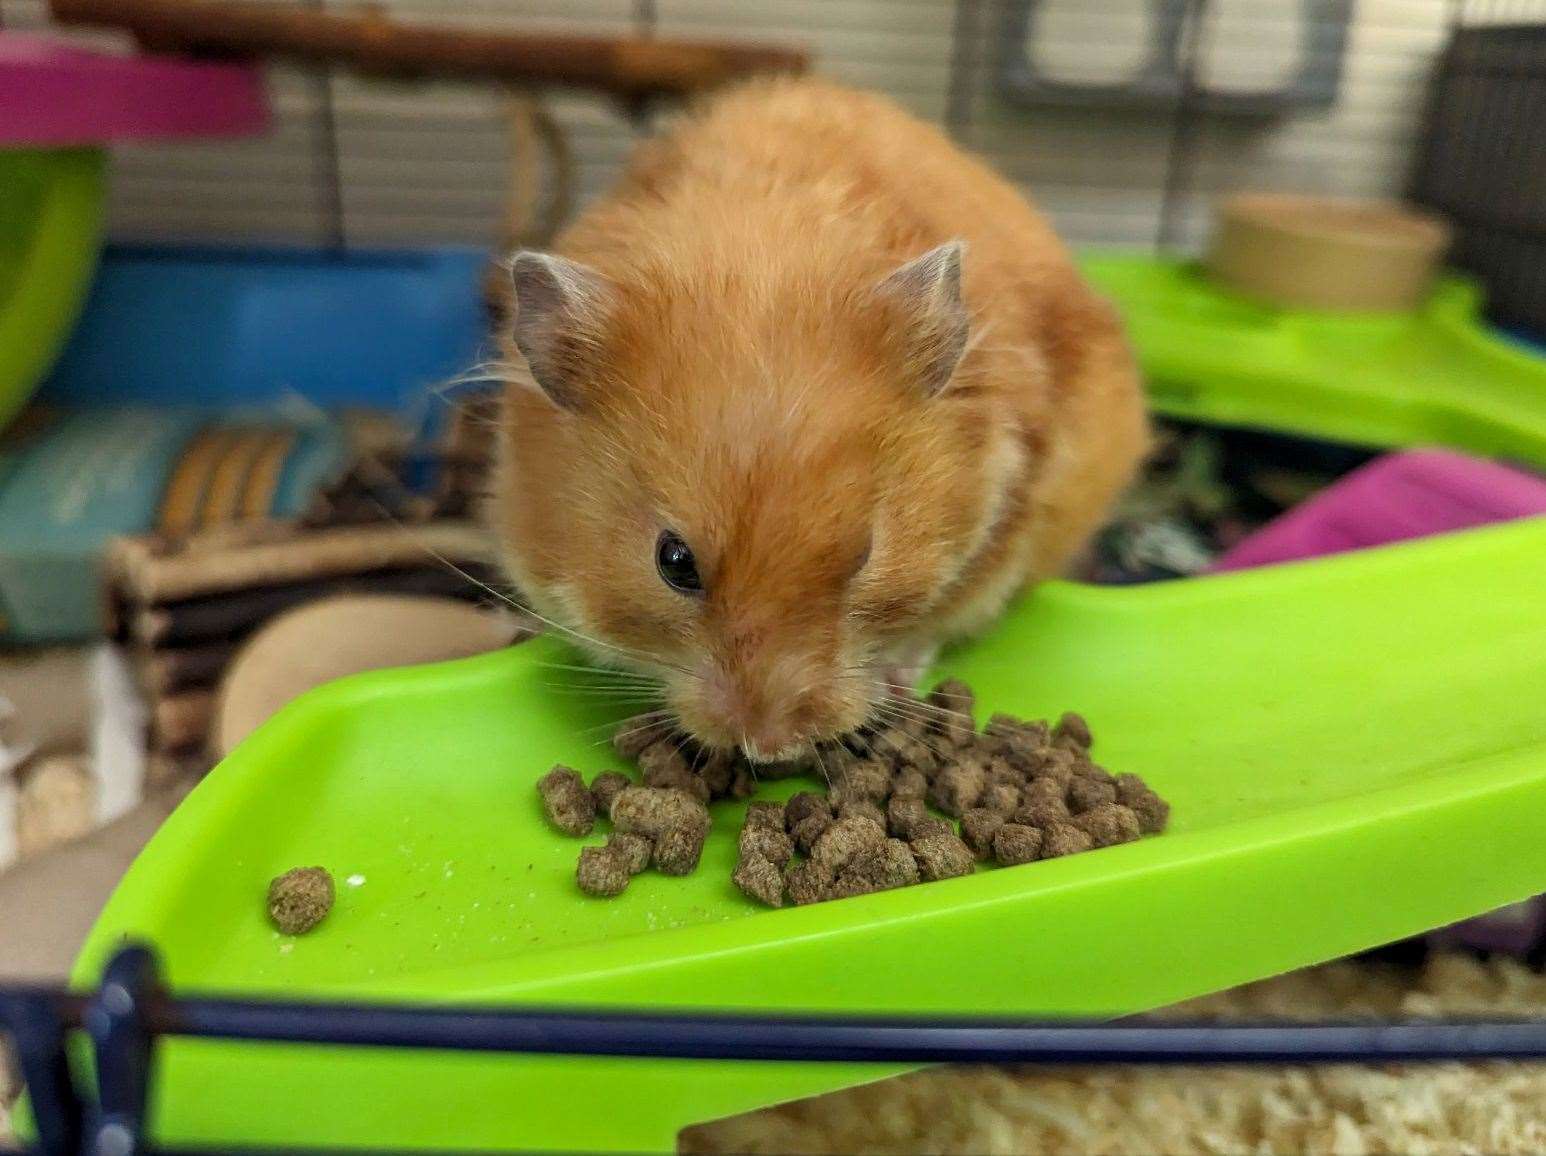 The hamster was found with an eye infection and needed food and water. Picture: RSPCA